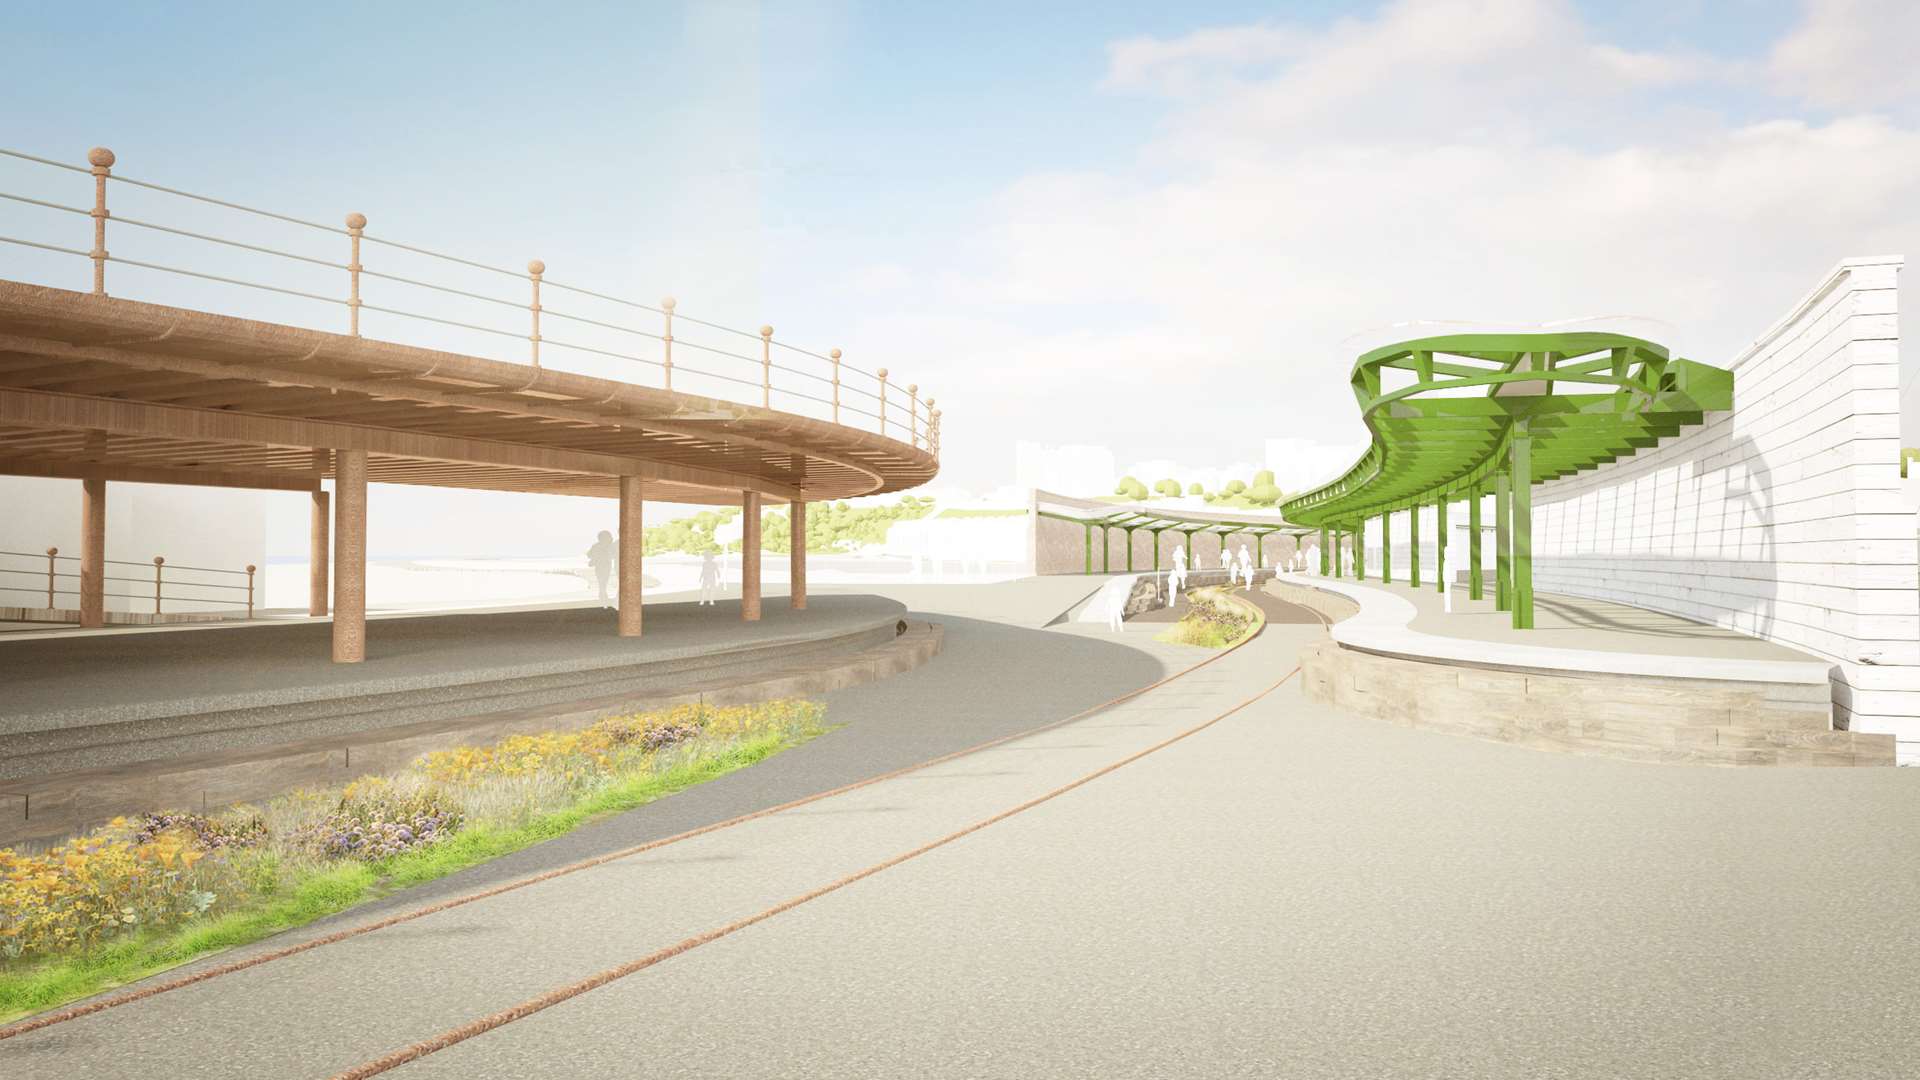 The work will start in the next few weeks and connect the harbour to the town centre with a walkway over the old railway line. Picture: Folkestone Harbour Company